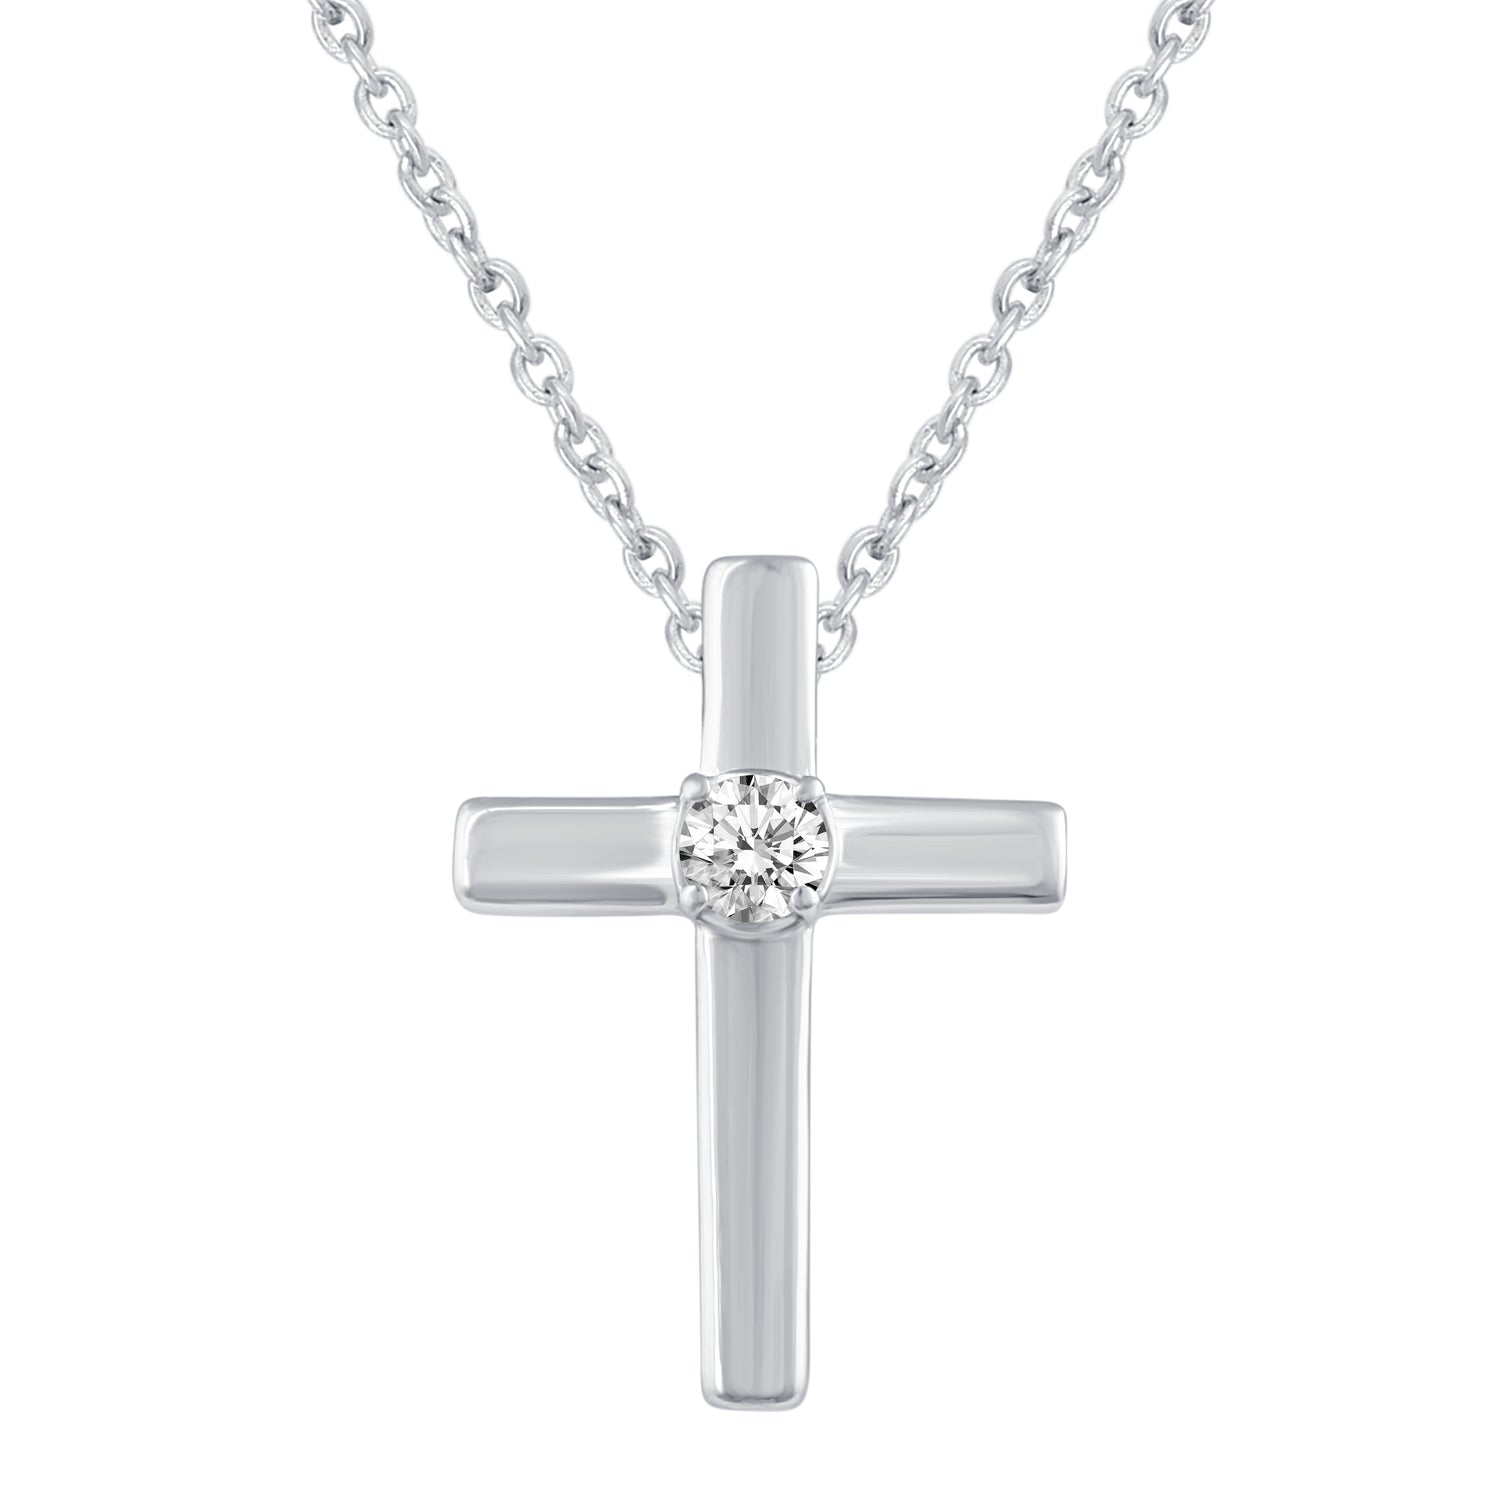 Heart and Cross Layered 1/10 Cttw Natural Diamond Pendant Necklace set in 925 Sterling Silver…